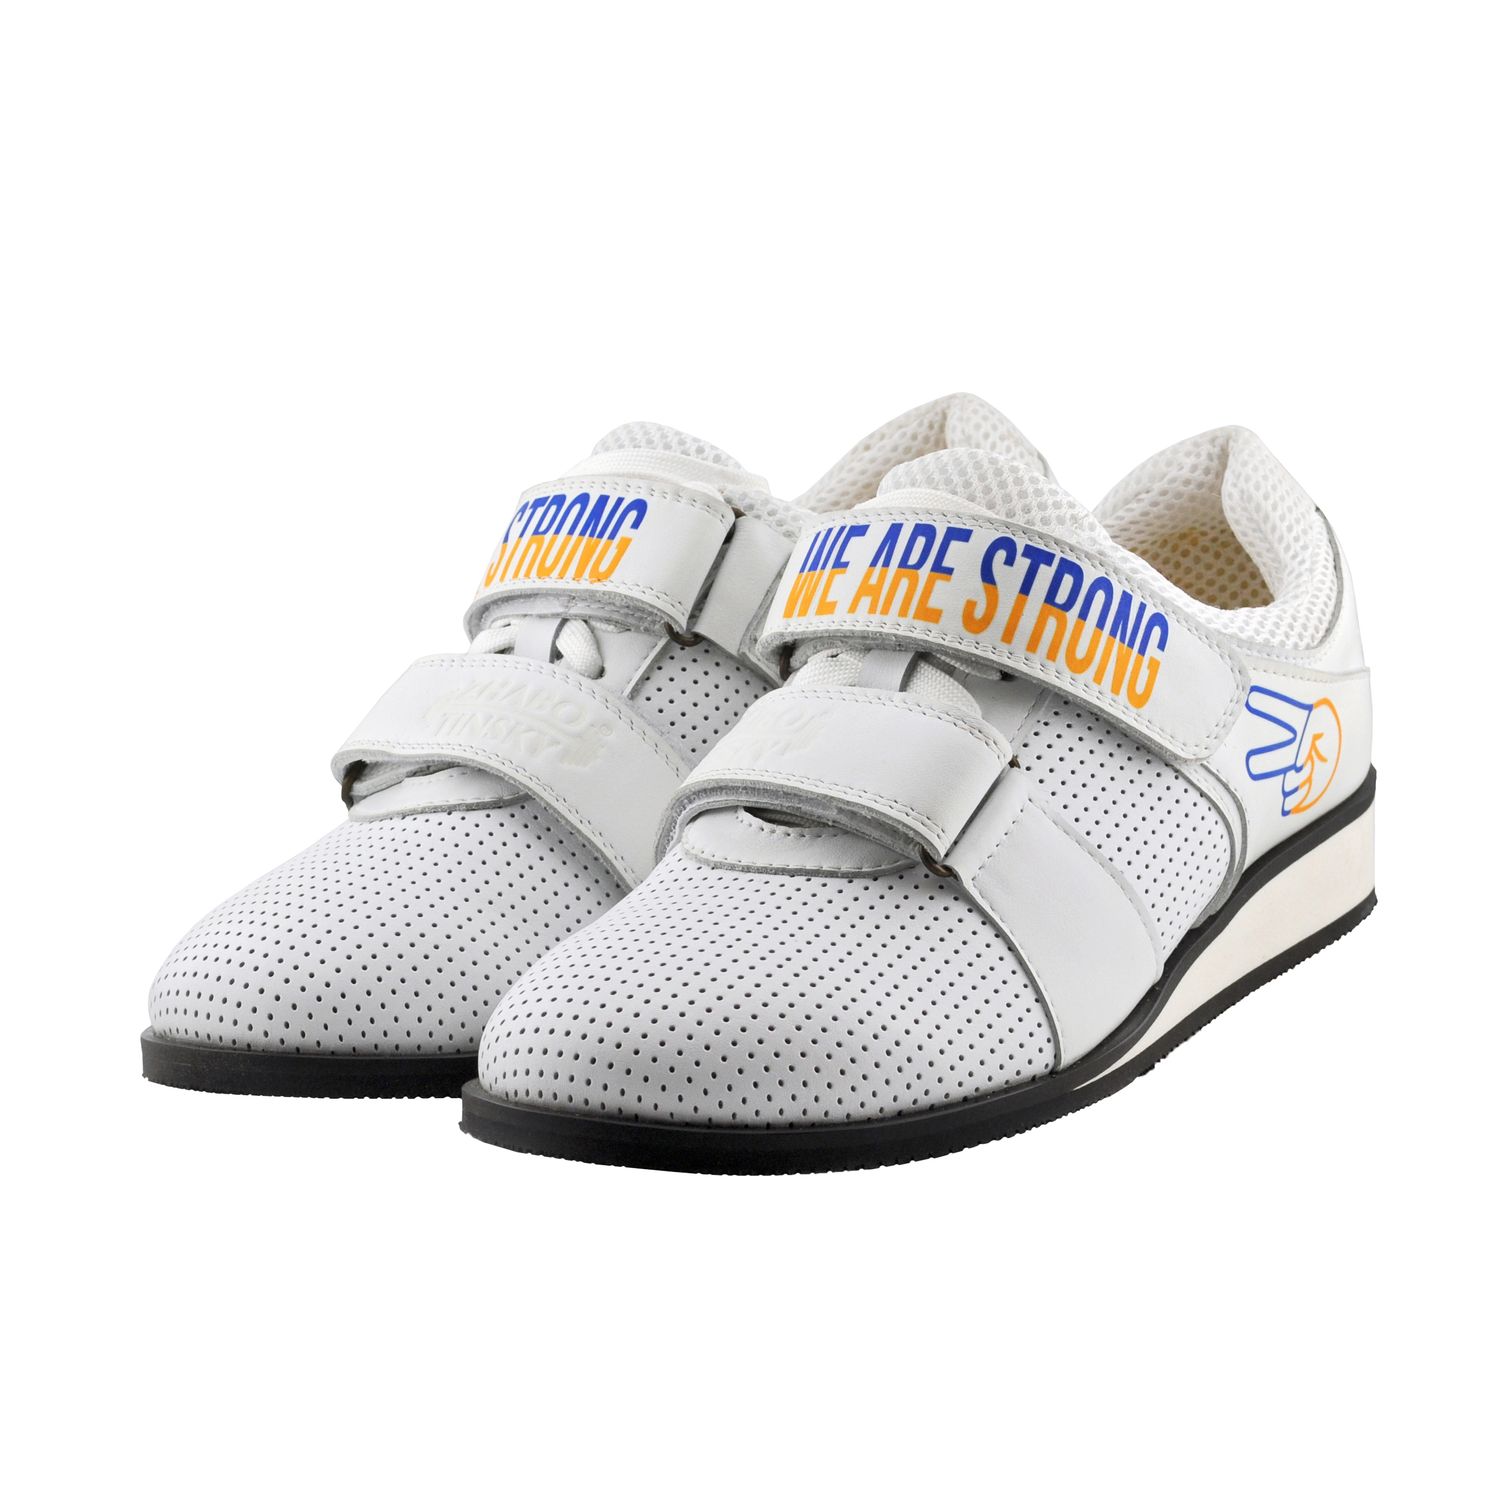 Weightlifting shoes Zhabotinsky We are strong, white, size 37 (UKR)